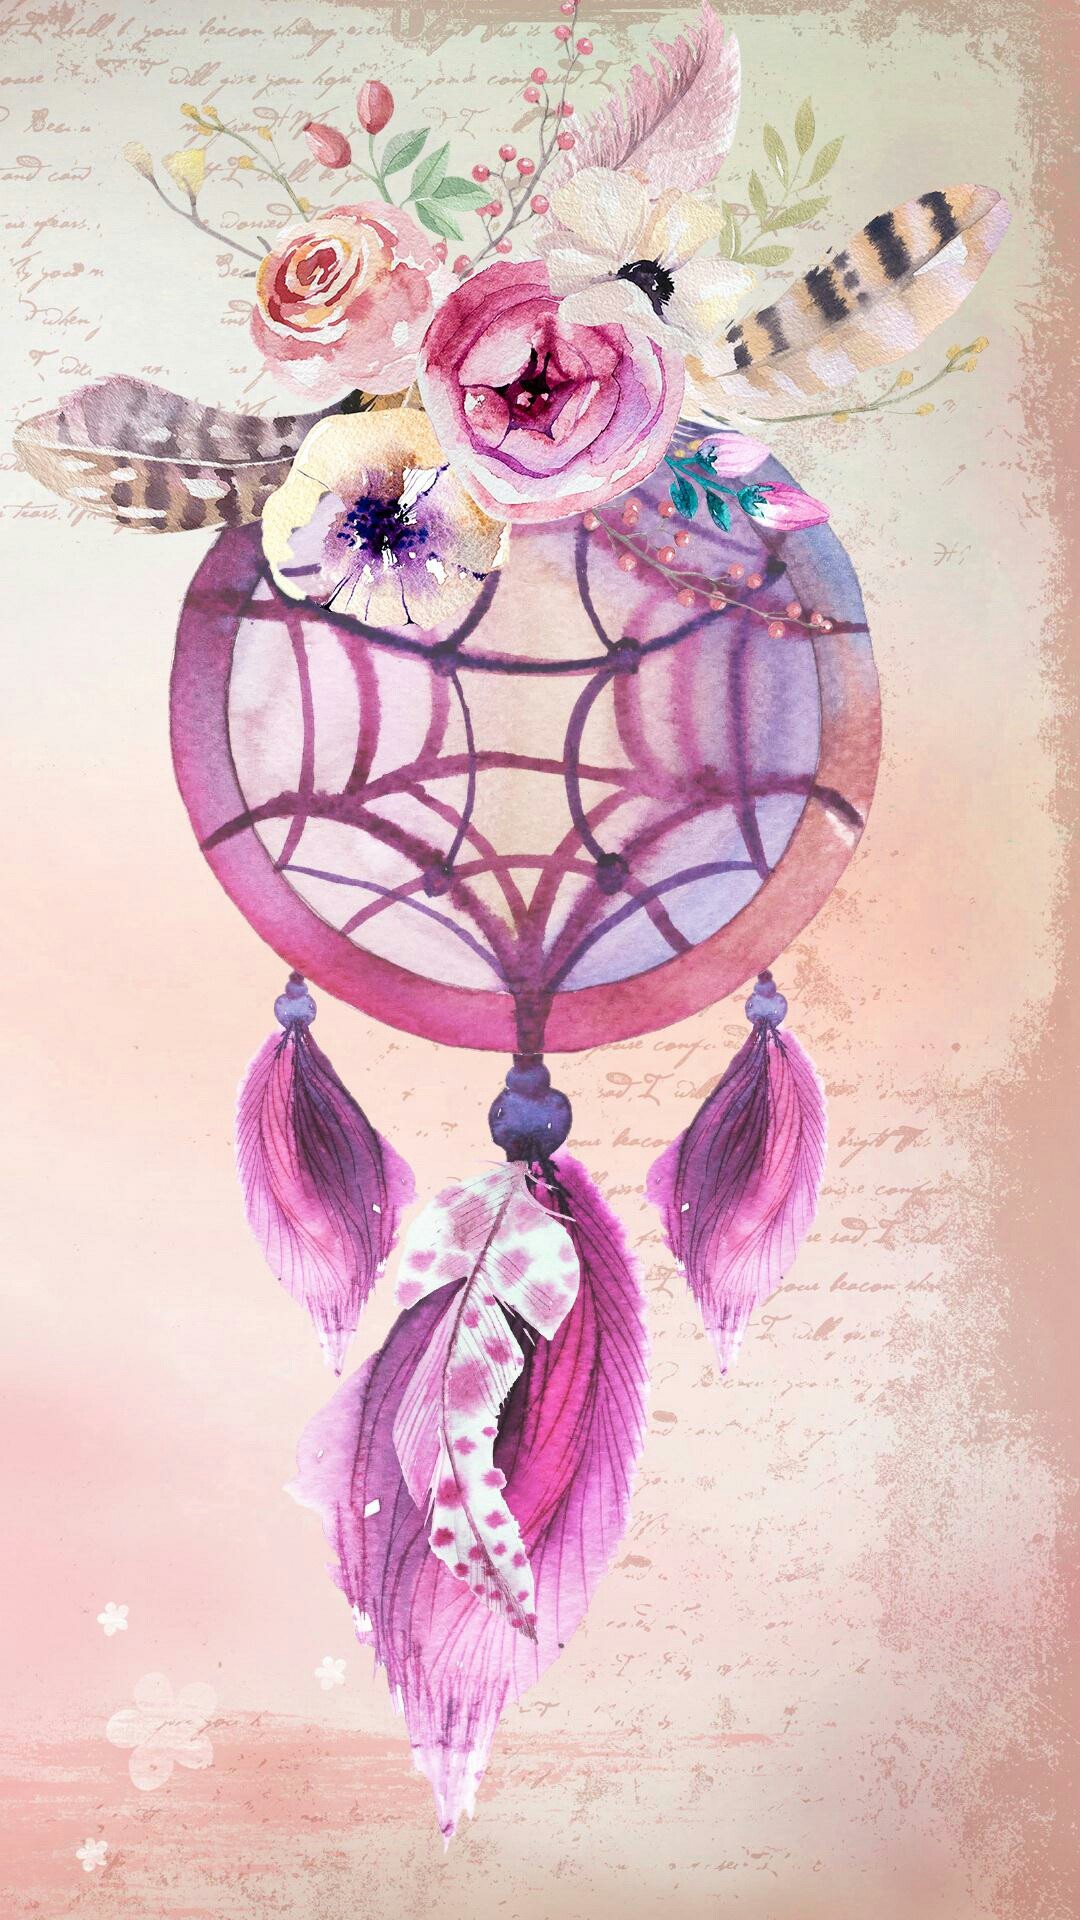 1080x1920 Pink and gold dreamcatcher